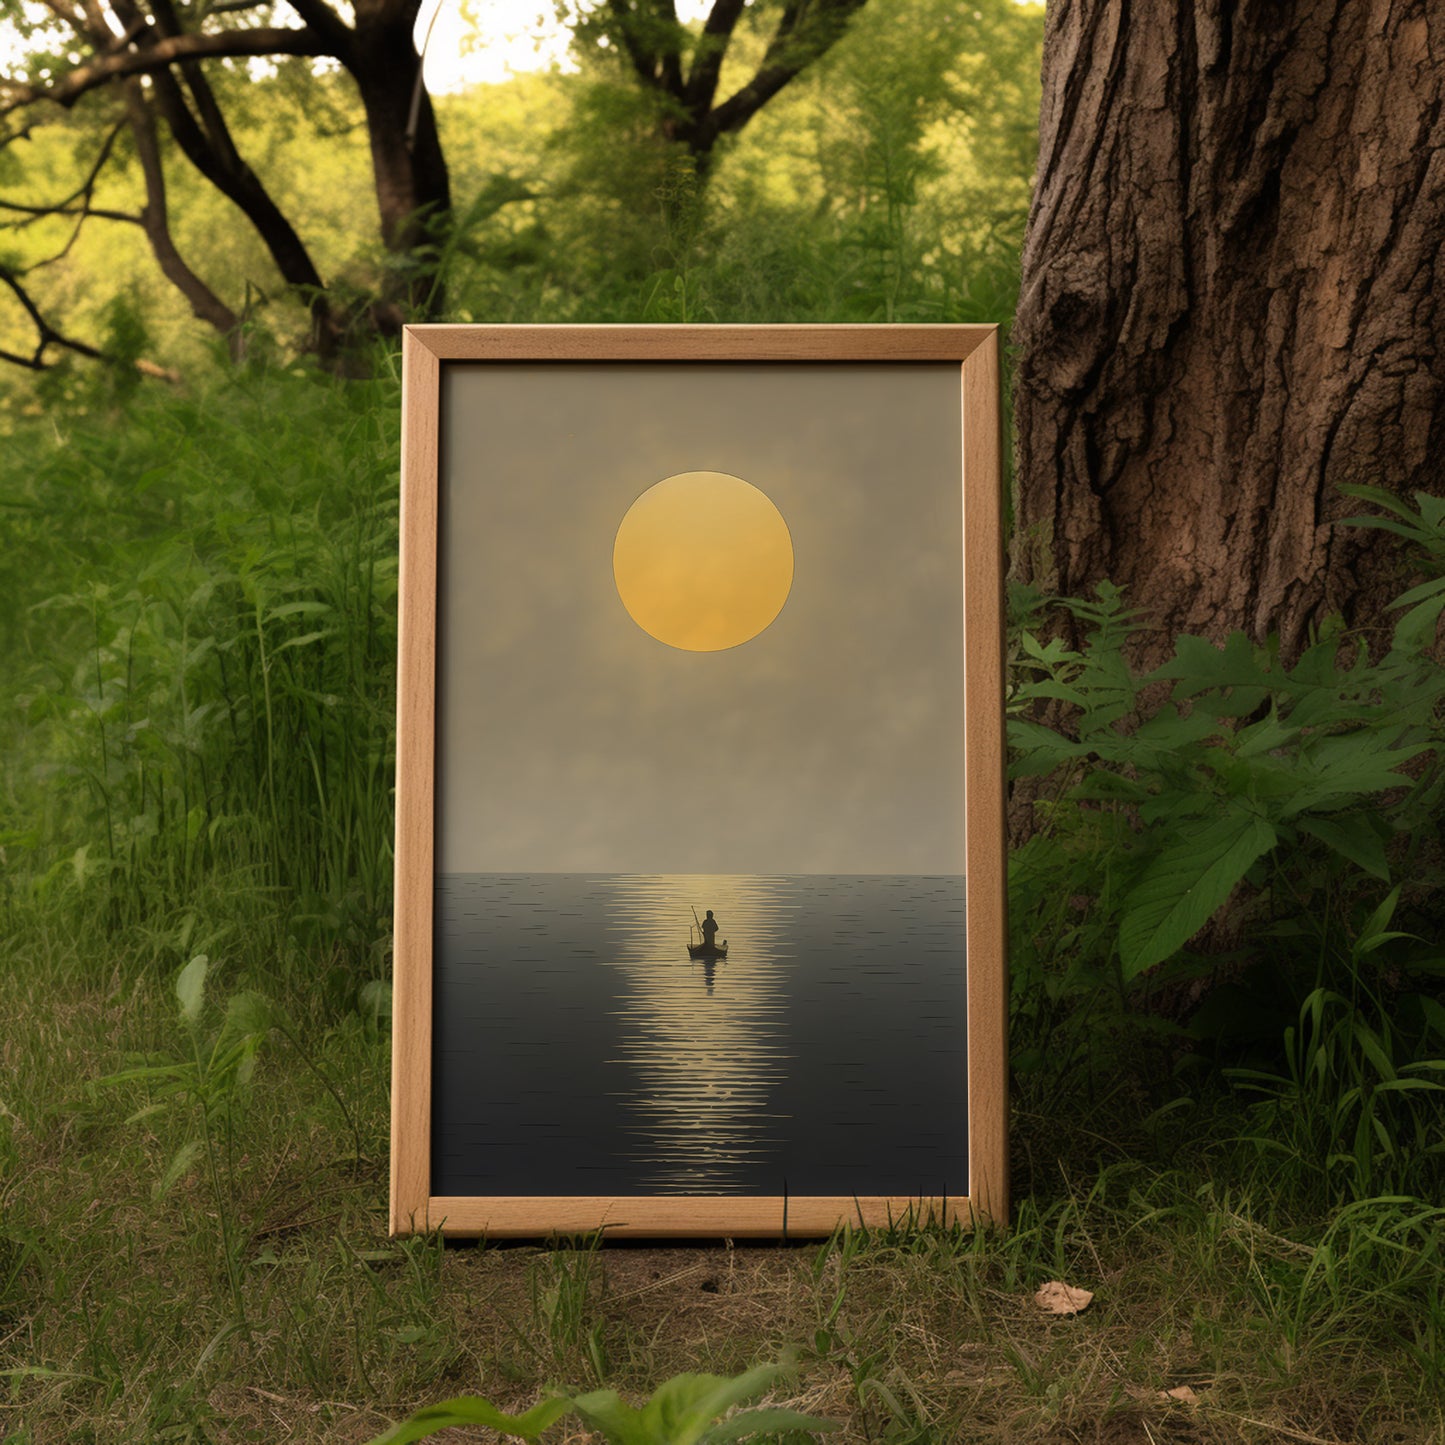 A framed painting of a golden moon over a calm lake and a lone figure, displayed against a wooded backdrop.